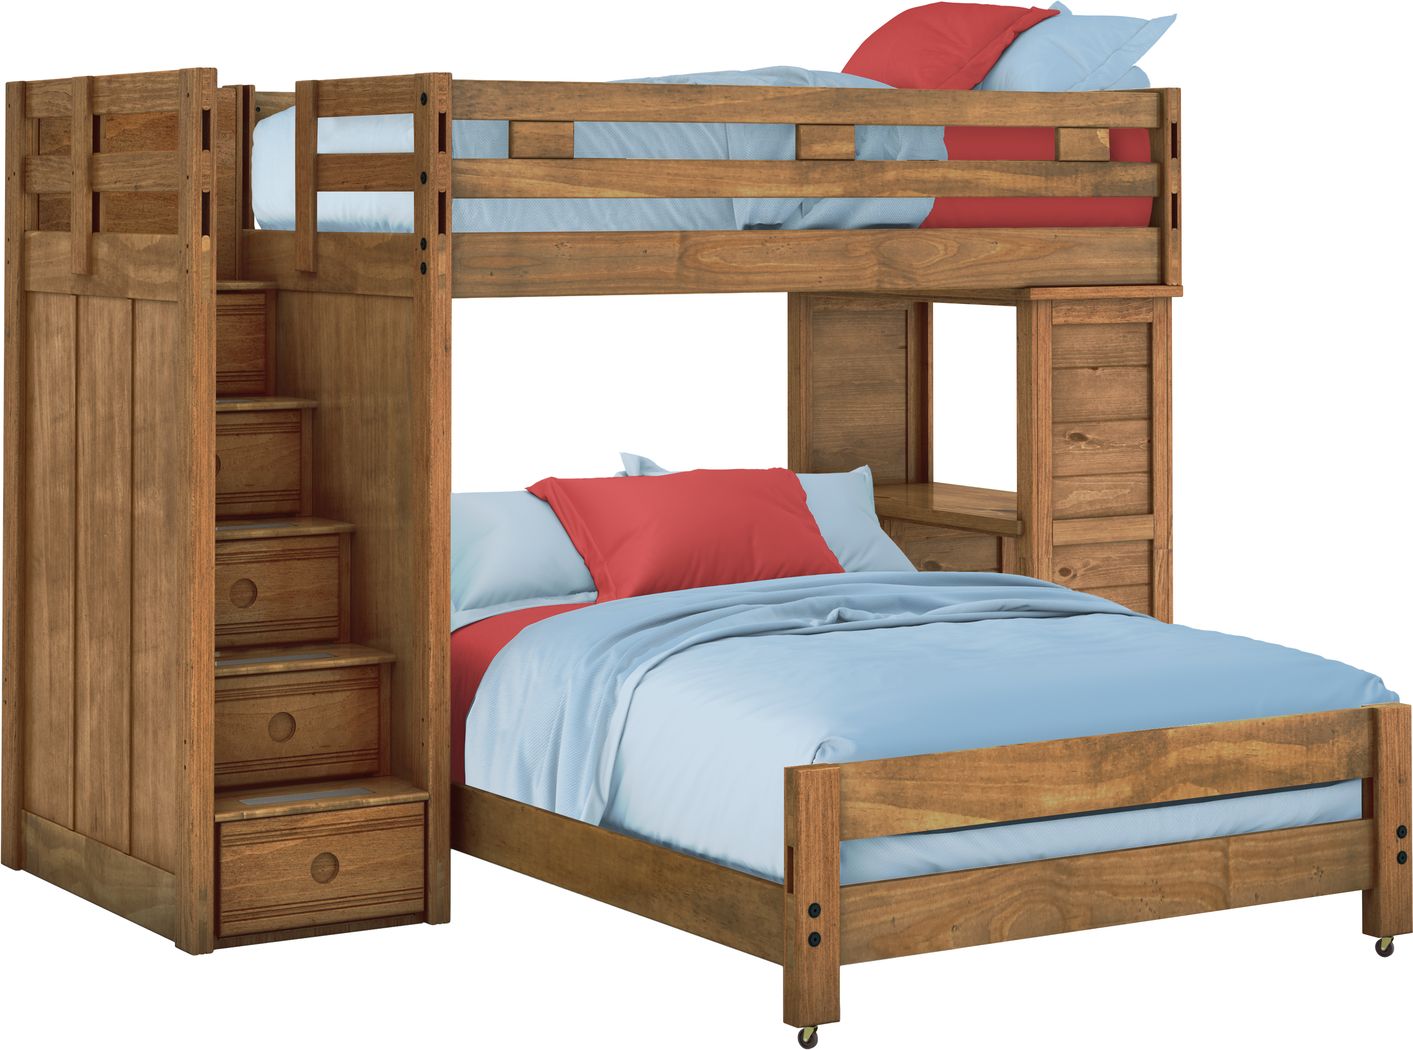 Kids Loft Beds With Stairs, Bunk Beds With Steps